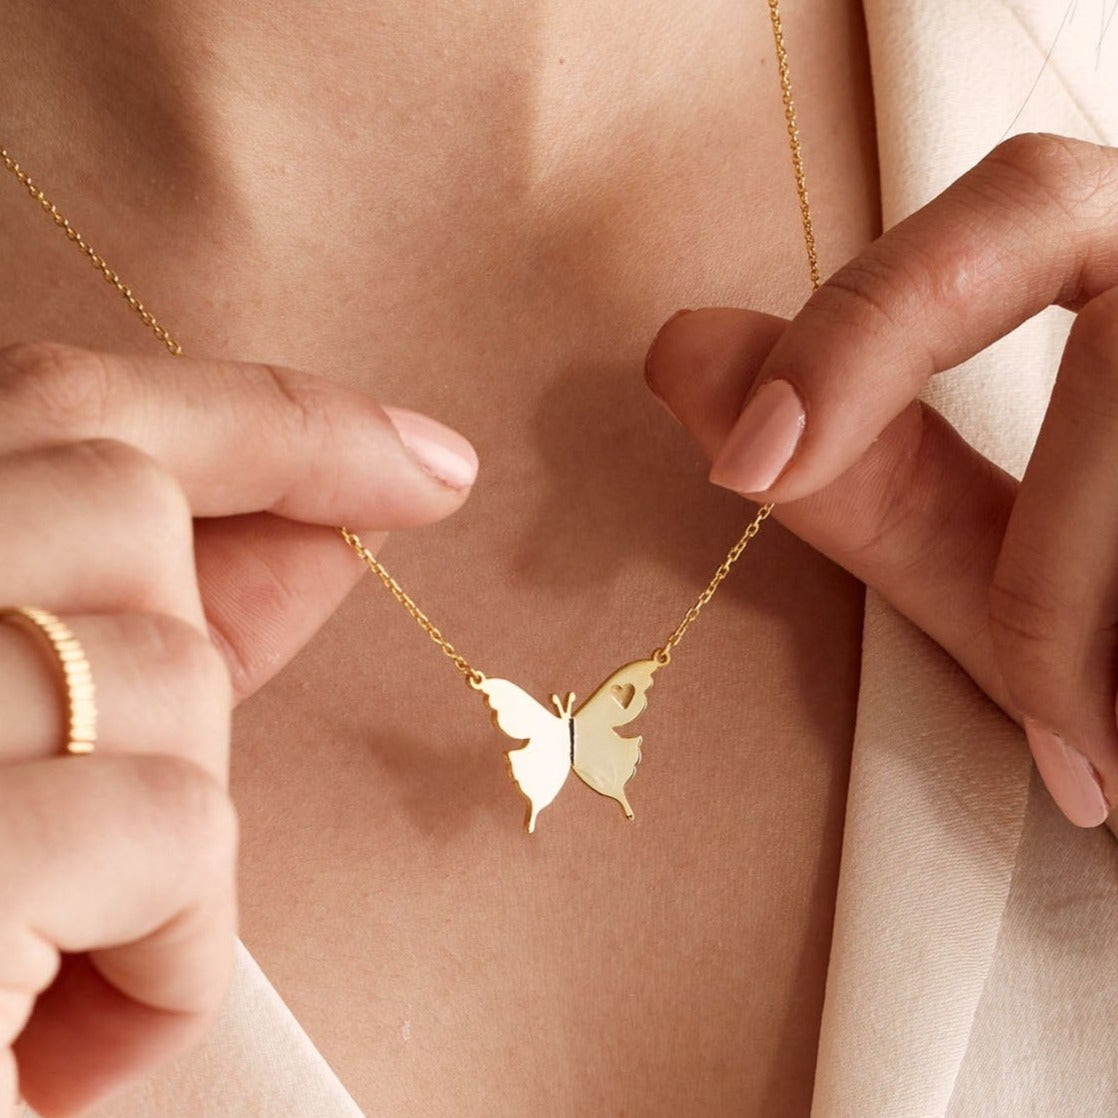 Engraved Butterfly Necklace | Minimalist Butterfly Necklace